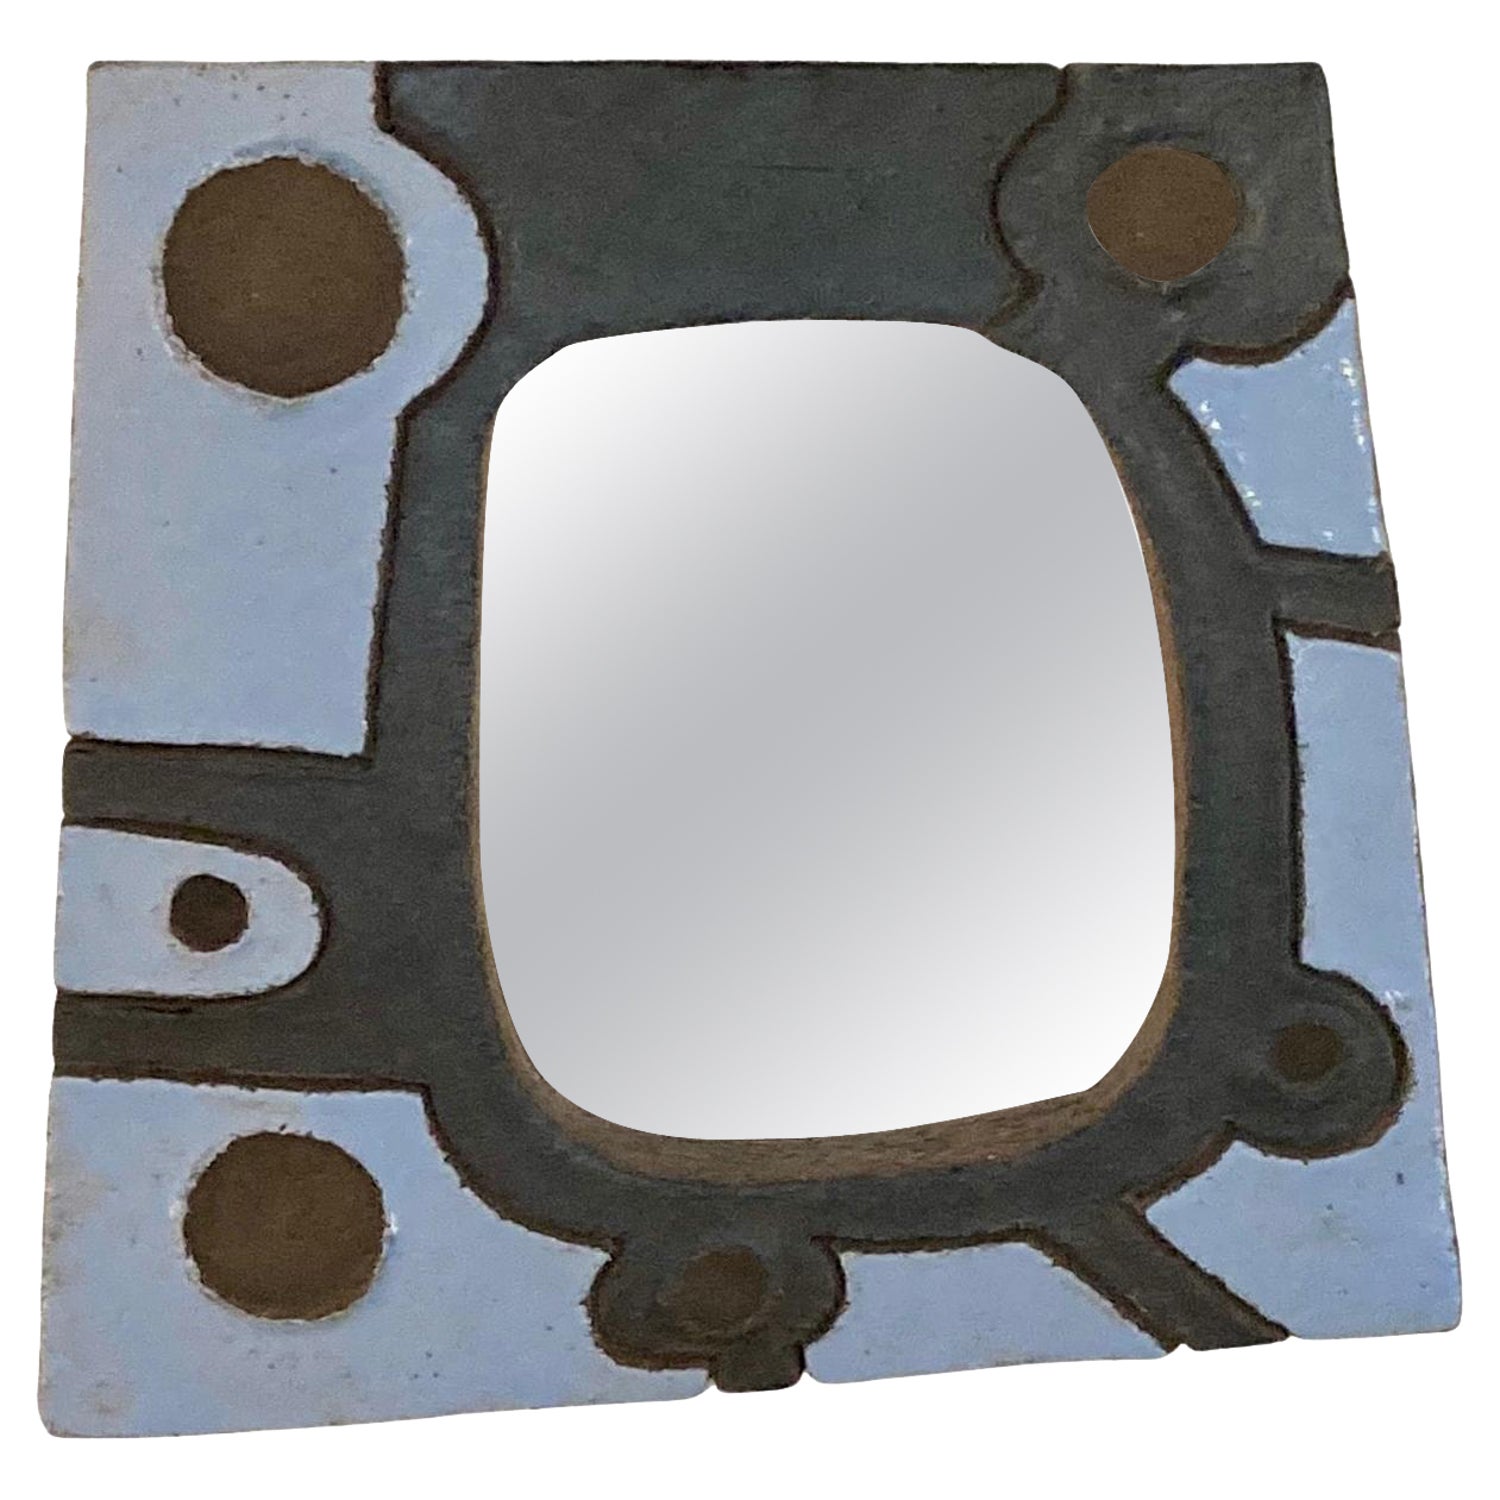 Ceramic mirror in "cubist" style by Nathalie Soufflet For Sale at 1stDibs